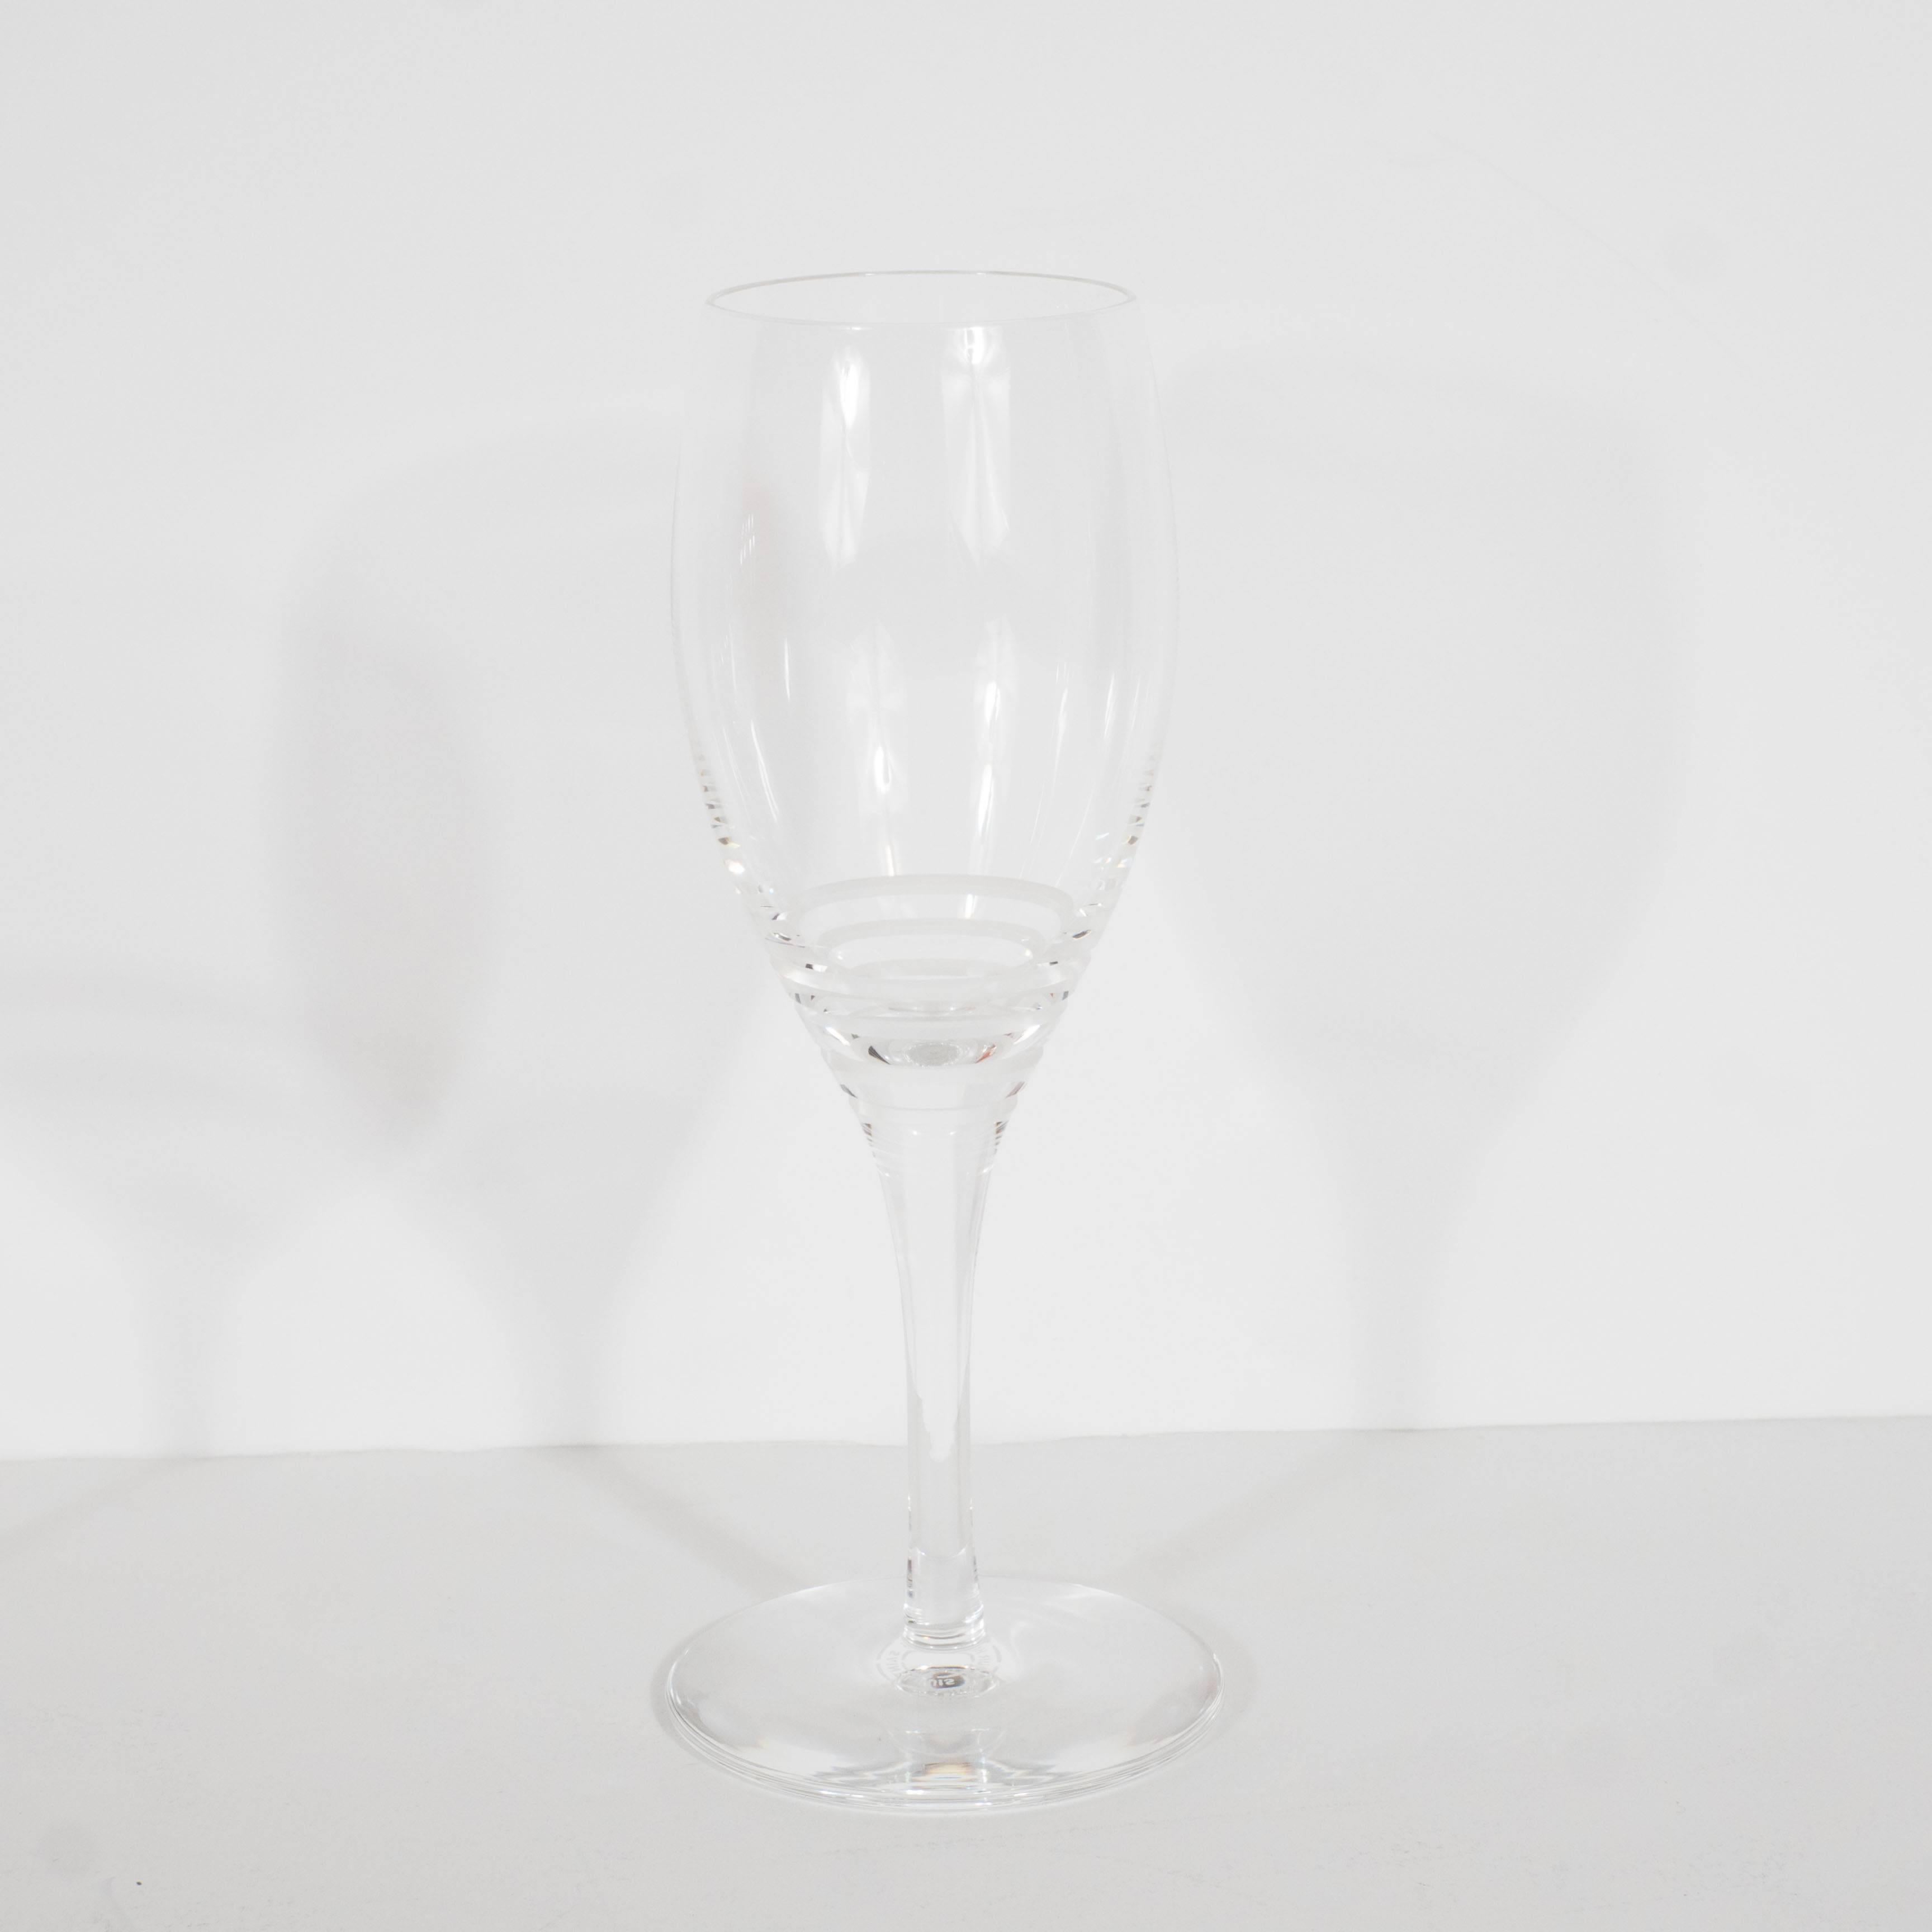 A suite of 12 of each red, white and champagne crystal glasses by Saint-Louis for Hermes, totaling 36 pieces. A Minimalist design features standard proportioned stem-to-bowl. Equidistant bands of etched carvings travel across the perimeter of the